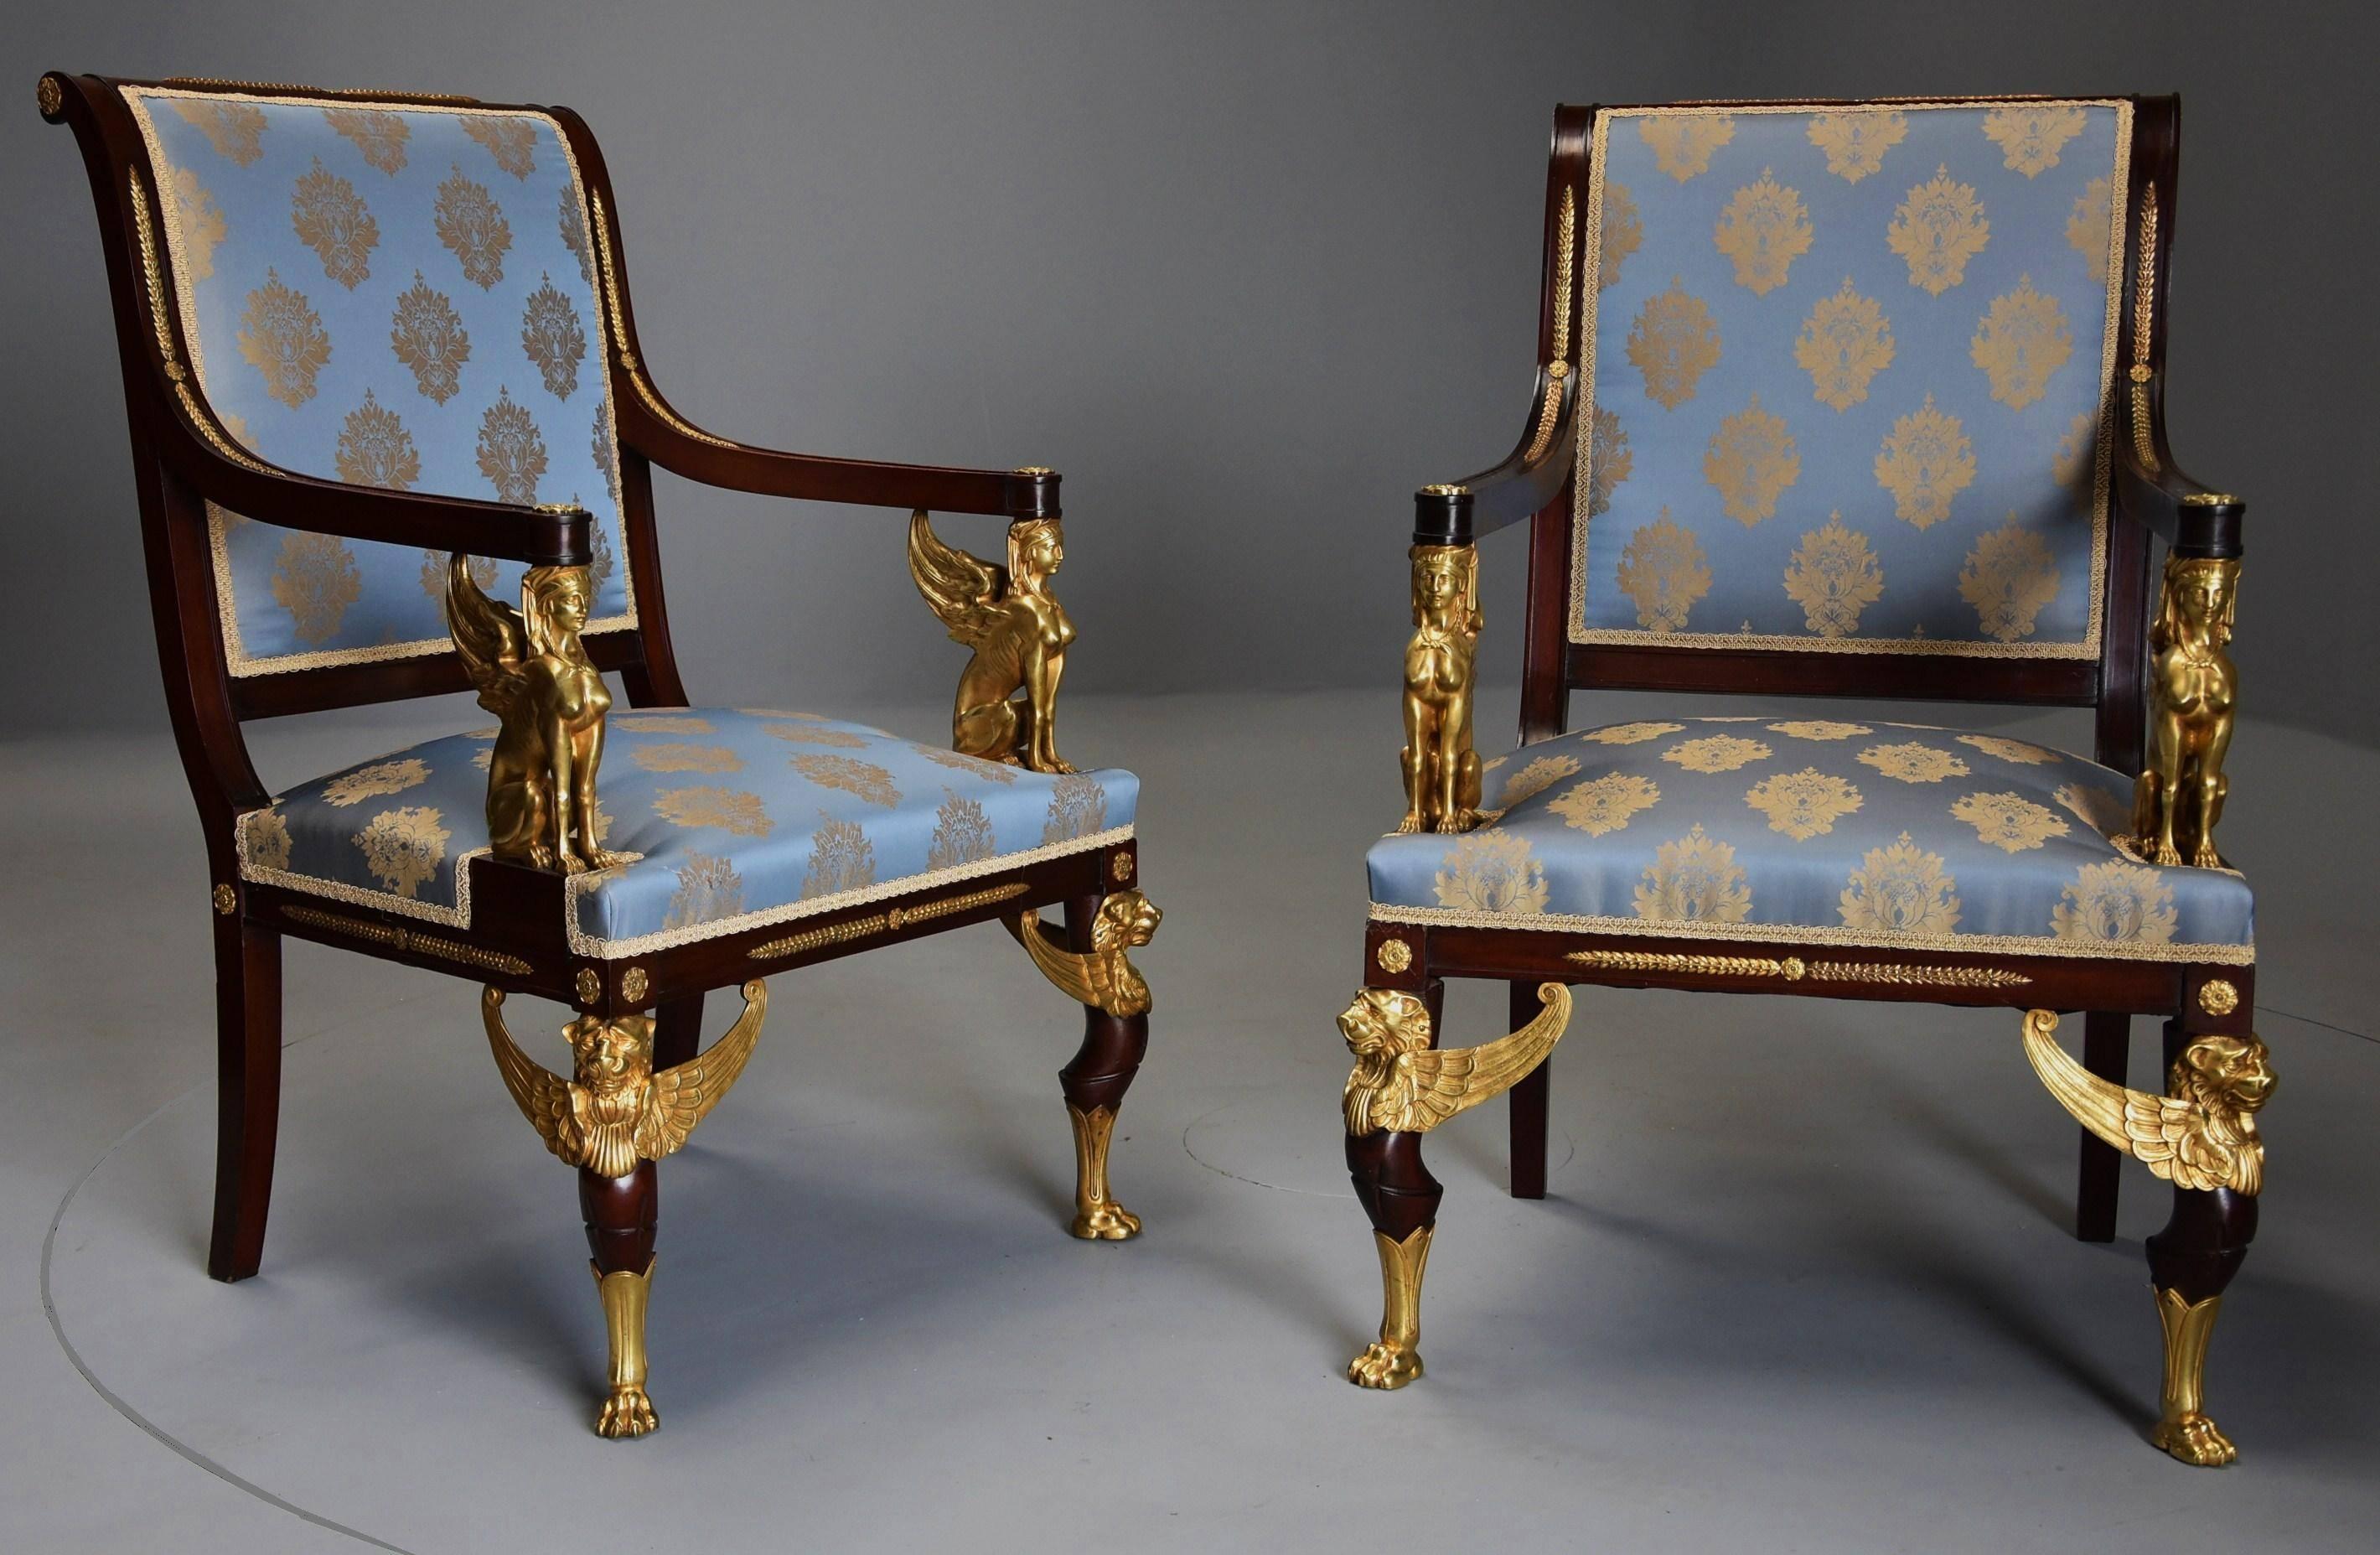 Upholstery Late 19th Century Set of Four English Mahogany Chairs in the French Empire Style For Sale